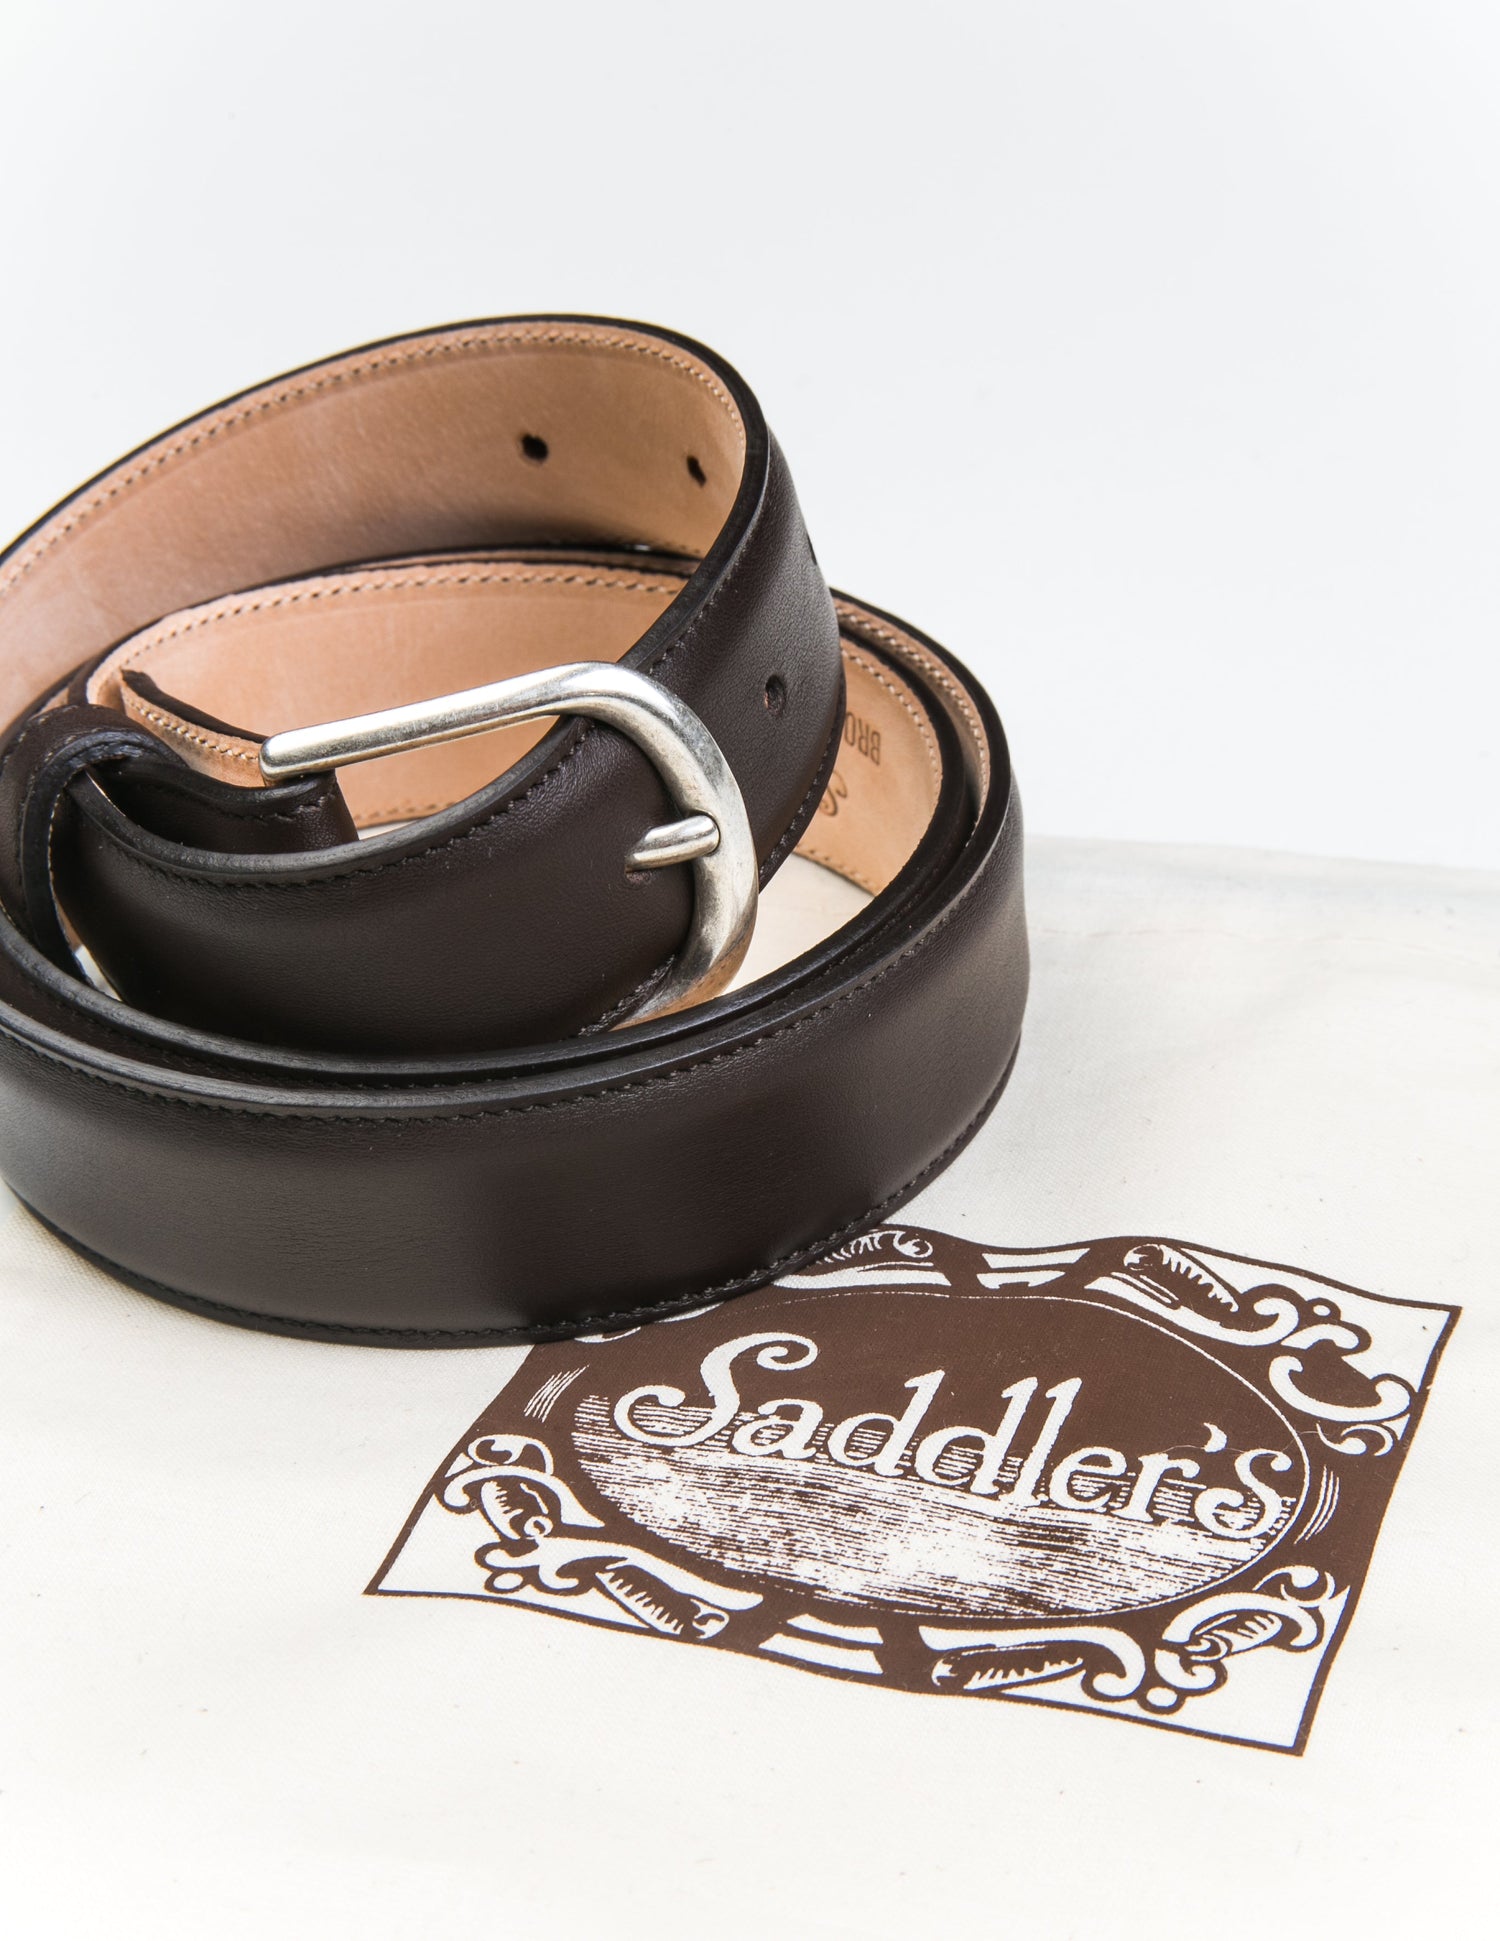 Photo of Brooklyn Tailors x Saddler's 30mm Belt in Smooth Leather - Cacao coiled next to the fabric bag it's sold with